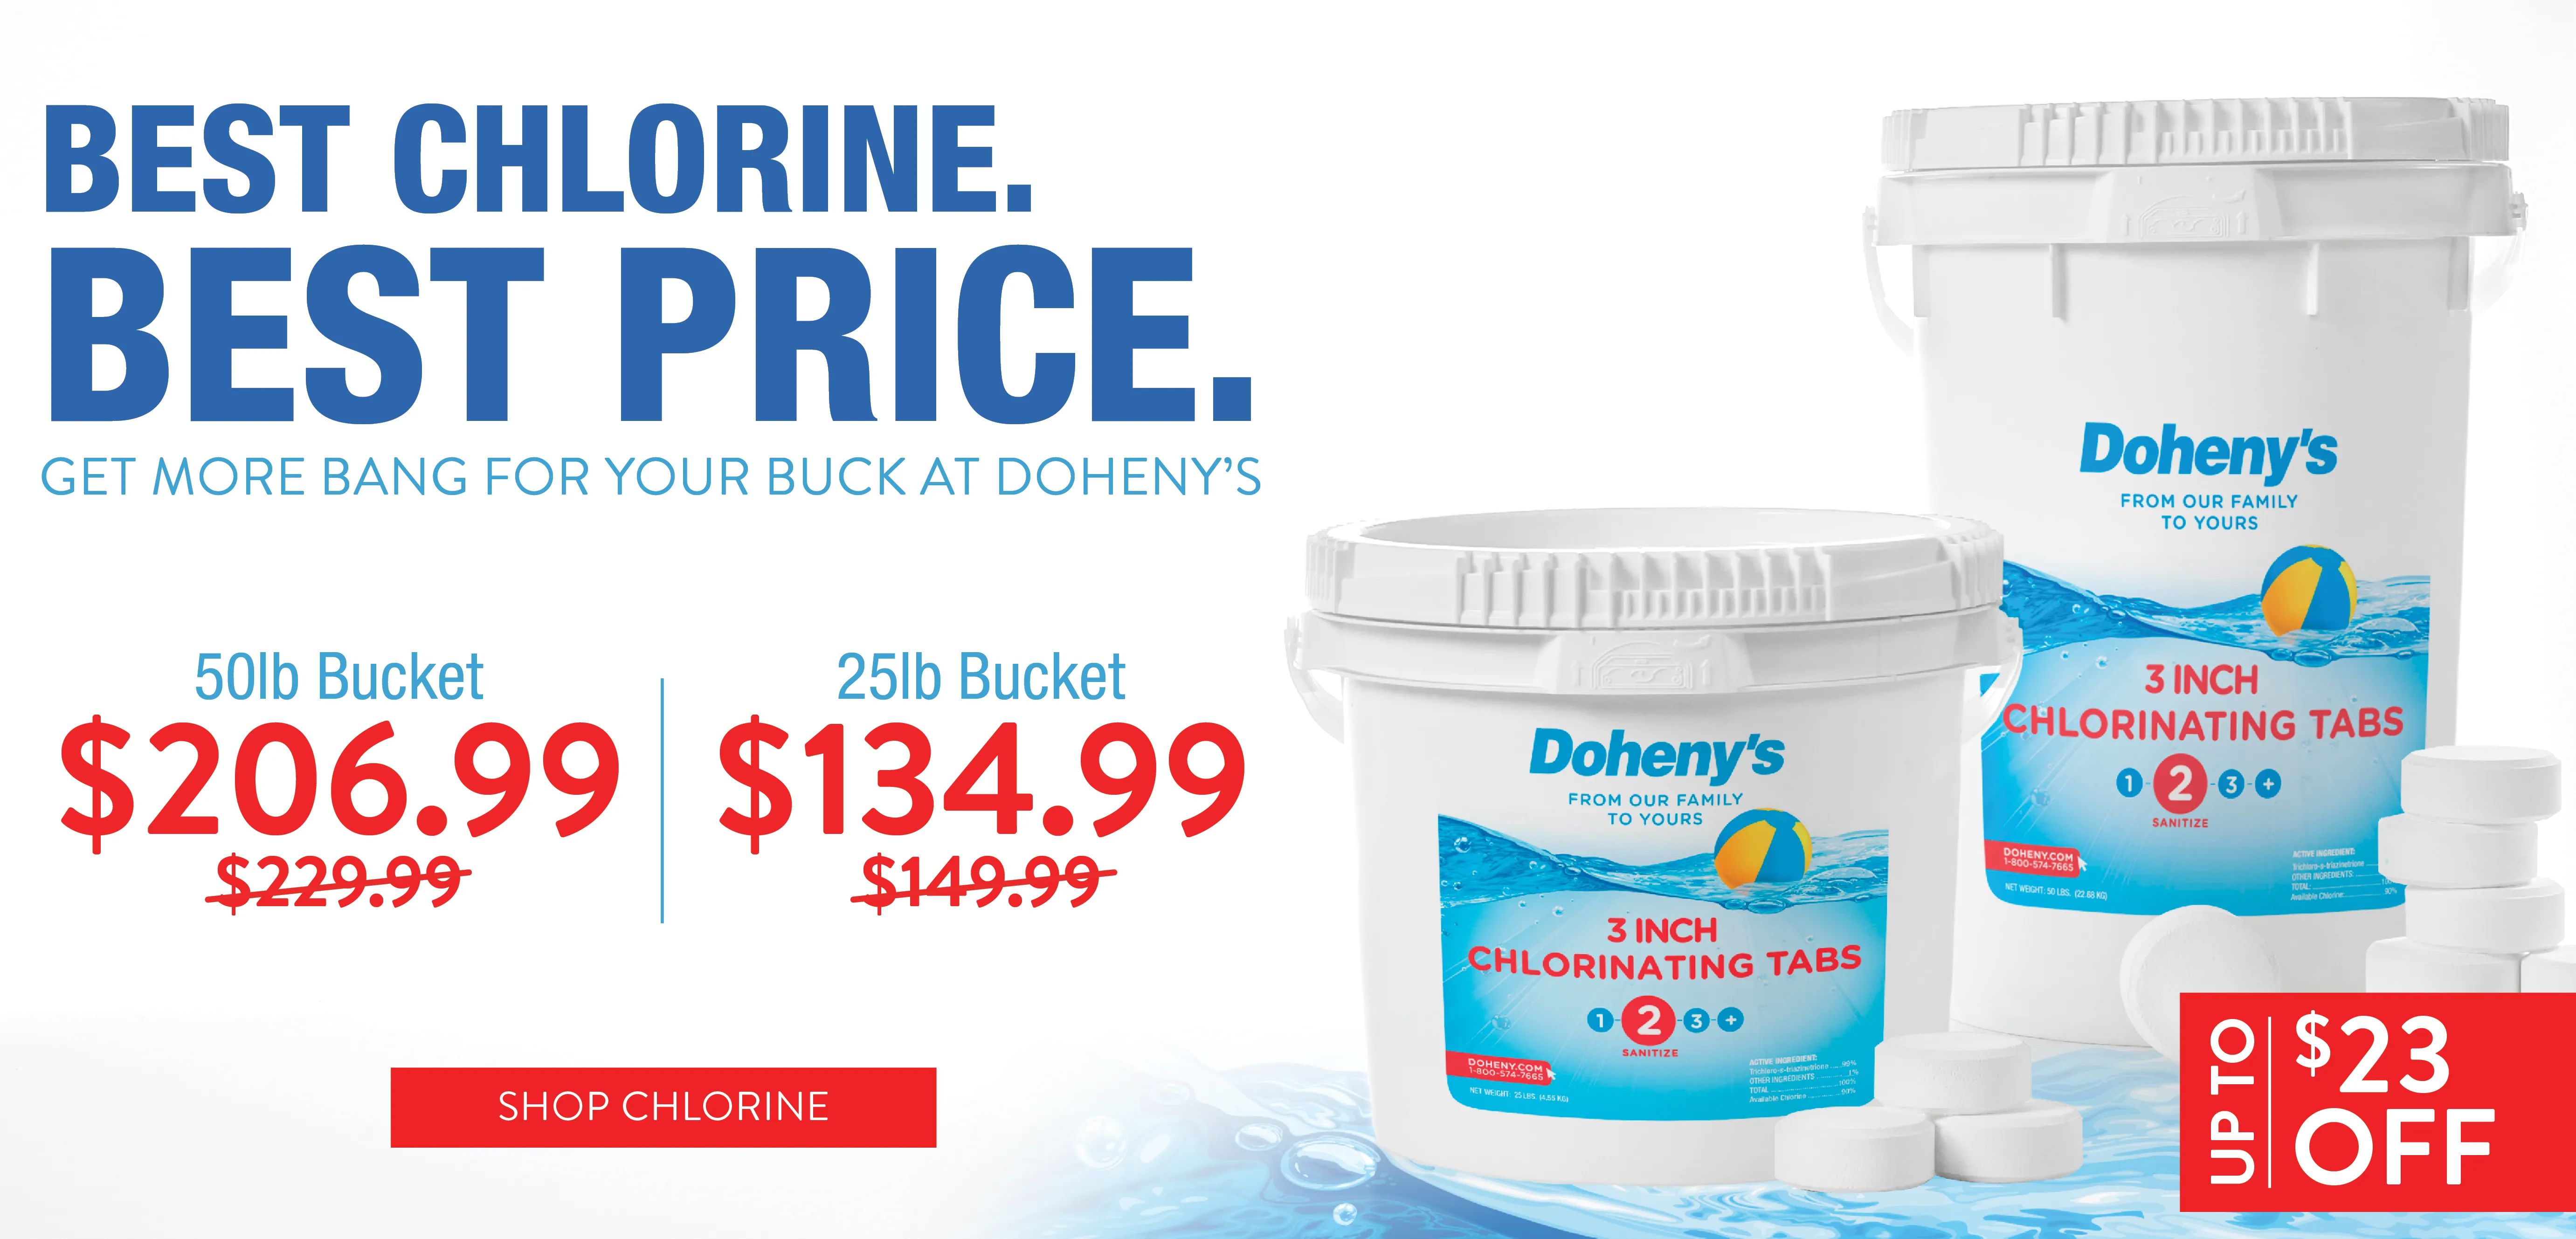 Best Price. Best Chlorine. Up to $23 Off Chlorine 3 inch Tabs. Shop Now.